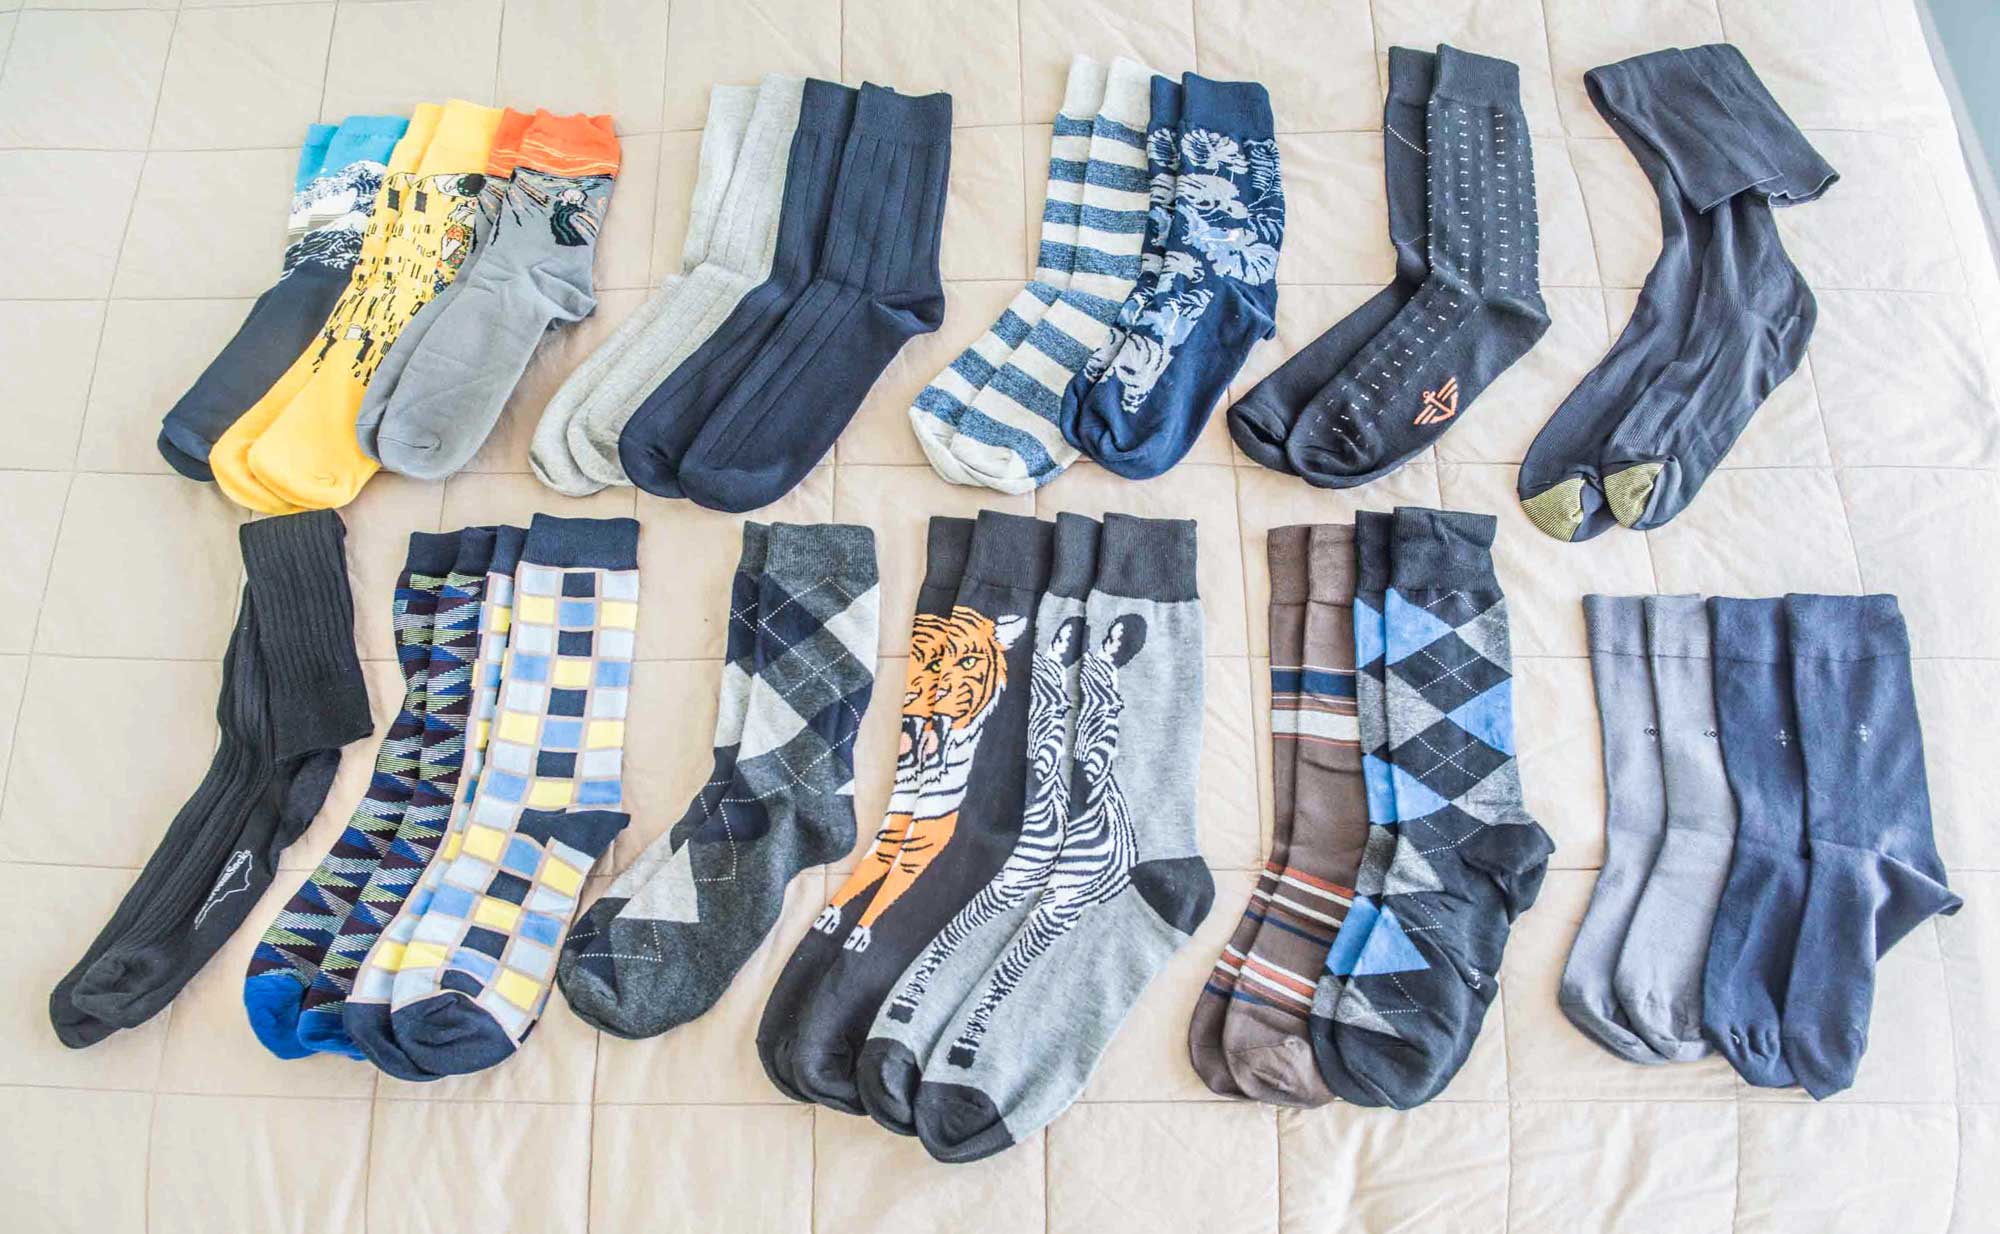 WOOL JOB LOT OF 60 PAIRS OF GOOD QUALITY MENS SUIT CASUAL LYCRA SOCKS 